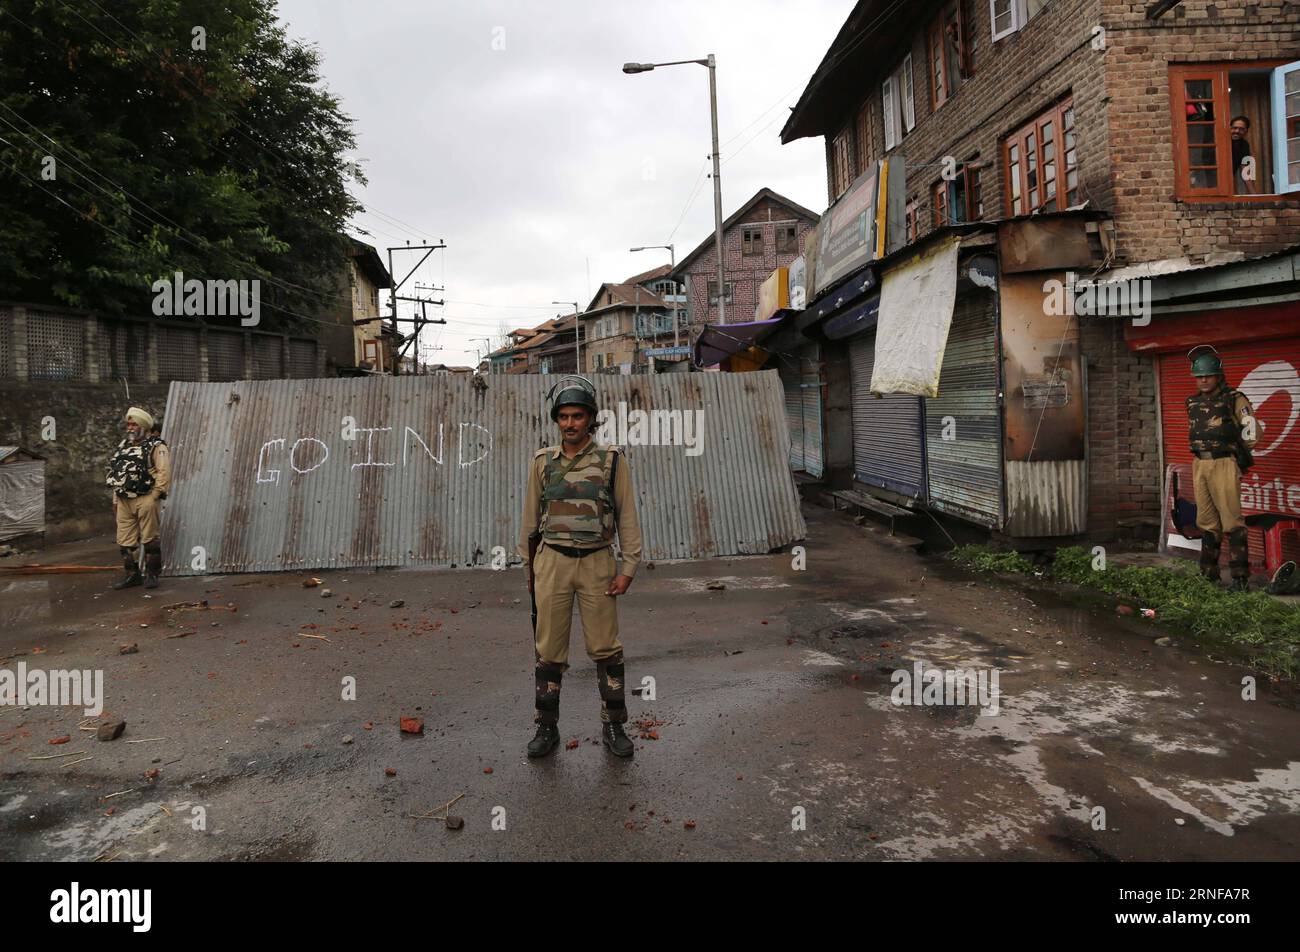 Bilder des Tages (160727) -- SRINAGAR, July 27, 2016 -- Indian paramilitary troopers stand guard during a curfew in Srinagar, summer capital of Indian-controlled Kashmir, on July 27, 2016. Protests have been held in Kashmir since July 9 over the killing of Burhan Wani, a top figure in the pro-independence Hizbul Mujahideen group. )(zhf) KASHMIR-SRINAGAR-CURFEW JavedxDar PUBLICATIONxNOTxINxCHN   Images the Day 160727 Srinagar July 27 2016 Indian paramilitary Troopers stand Guard during a Curfew in Srinagar Summer Capital of Indian Controlled Kashmir ON July 27 2016 Protest have been Hero in Kas Stock Photo